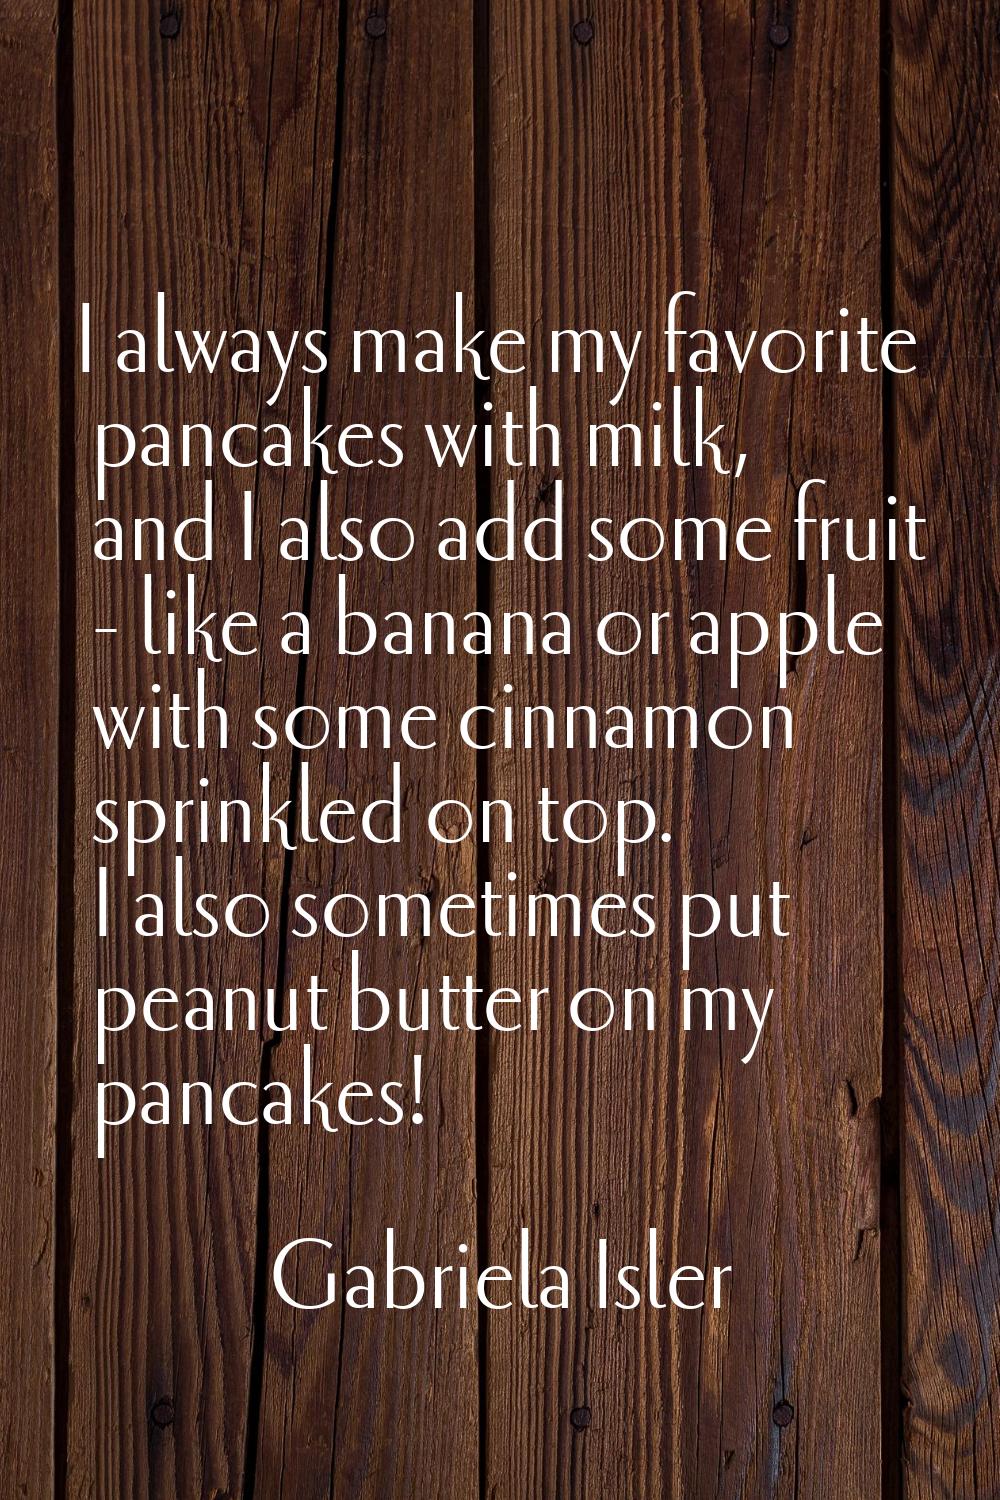 I always make my favorite pancakes with milk, and I also add some fruit - like a banana or apple wi